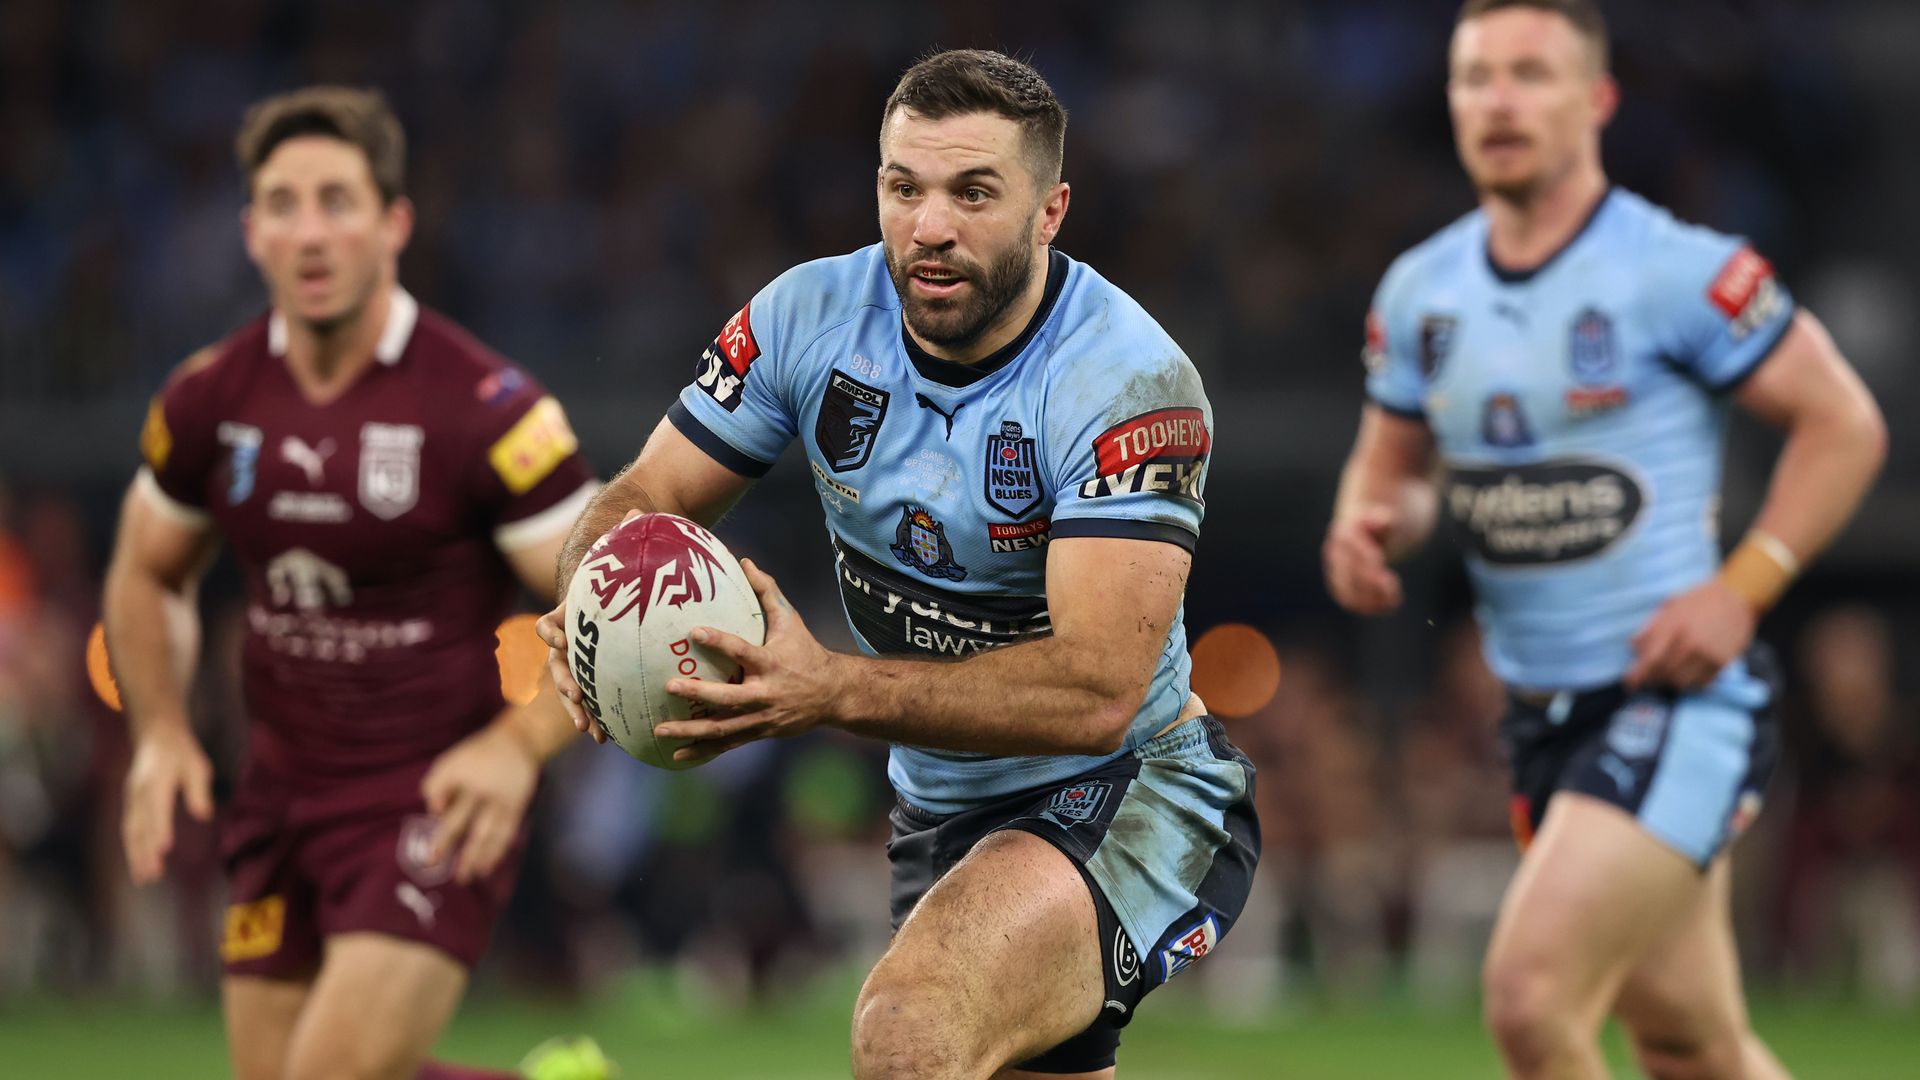 new-south-wales-vs-queensland-live-stream-how-to-watch-state-of-origin